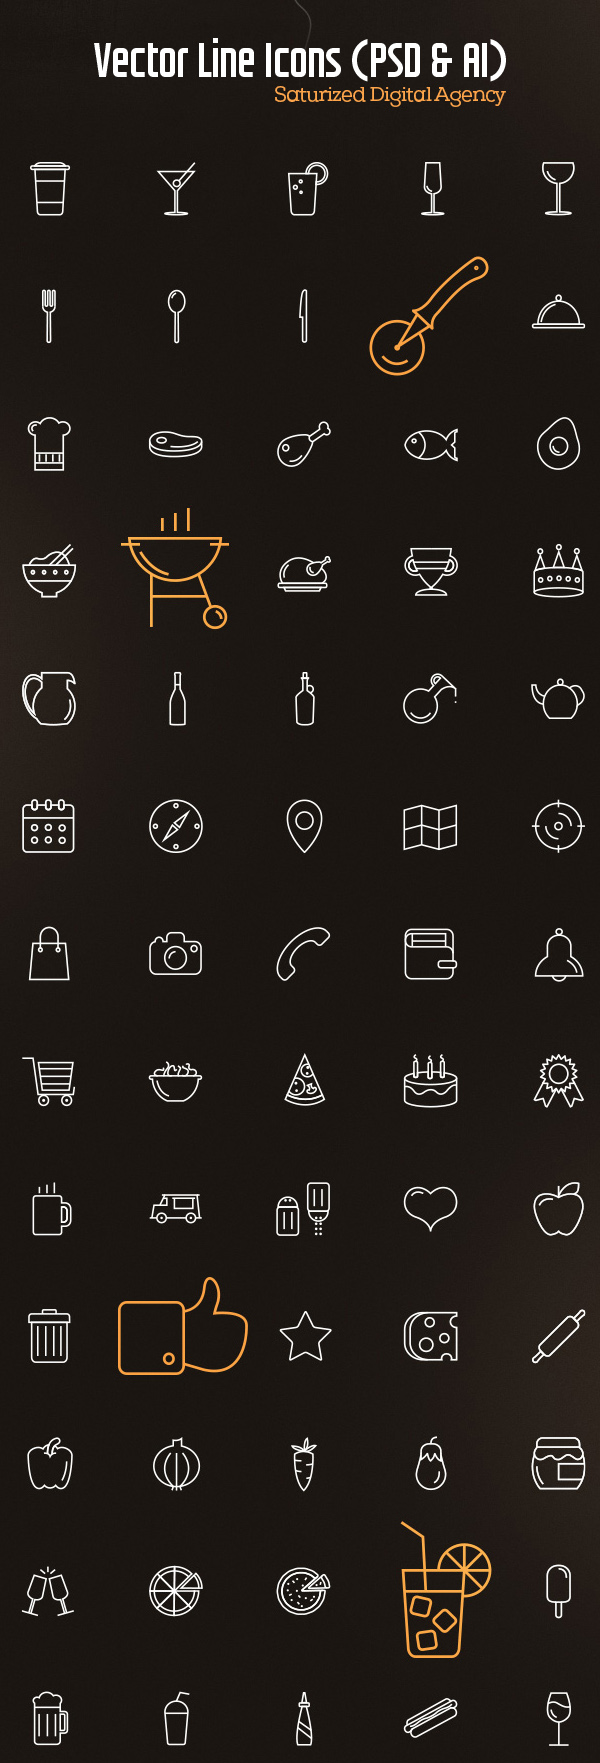 Free+Vector+Outline+Icon+Set+100+Icons